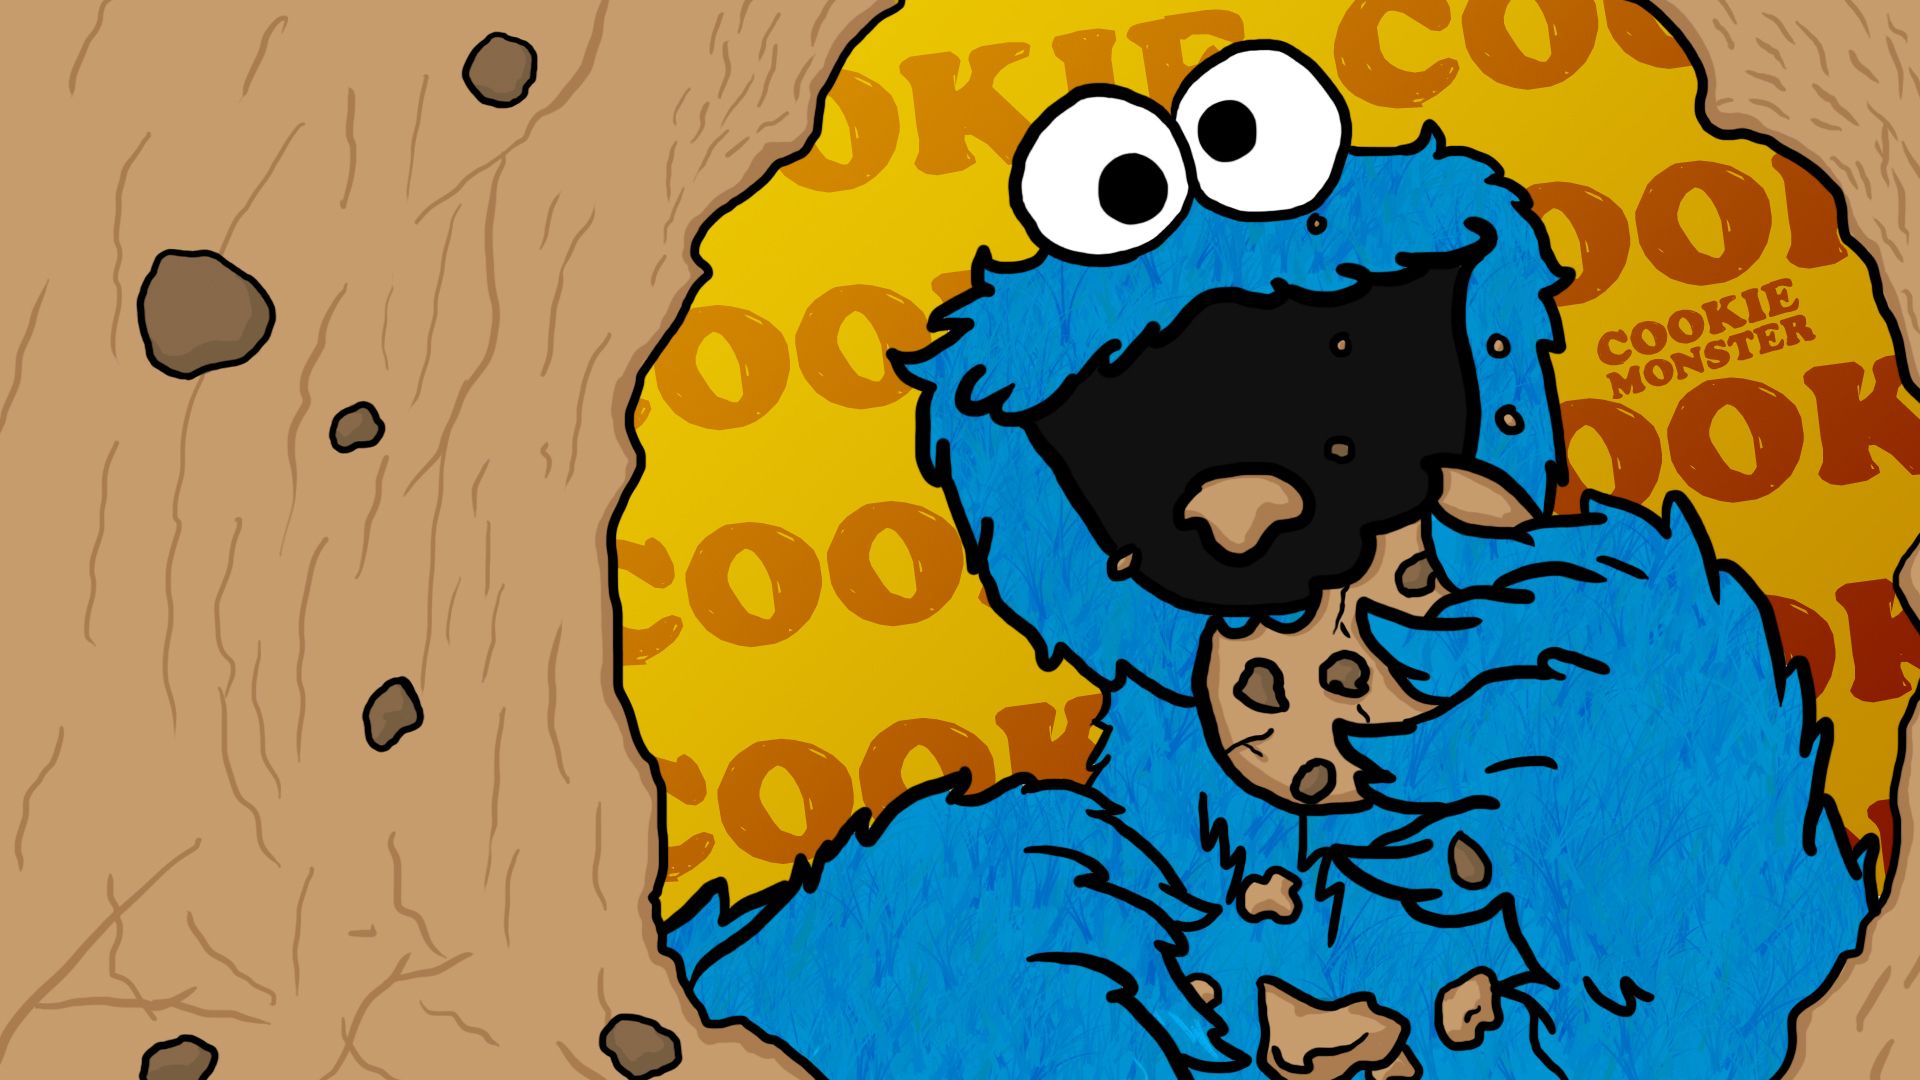 Gallery for - cookie monster wallpapers free